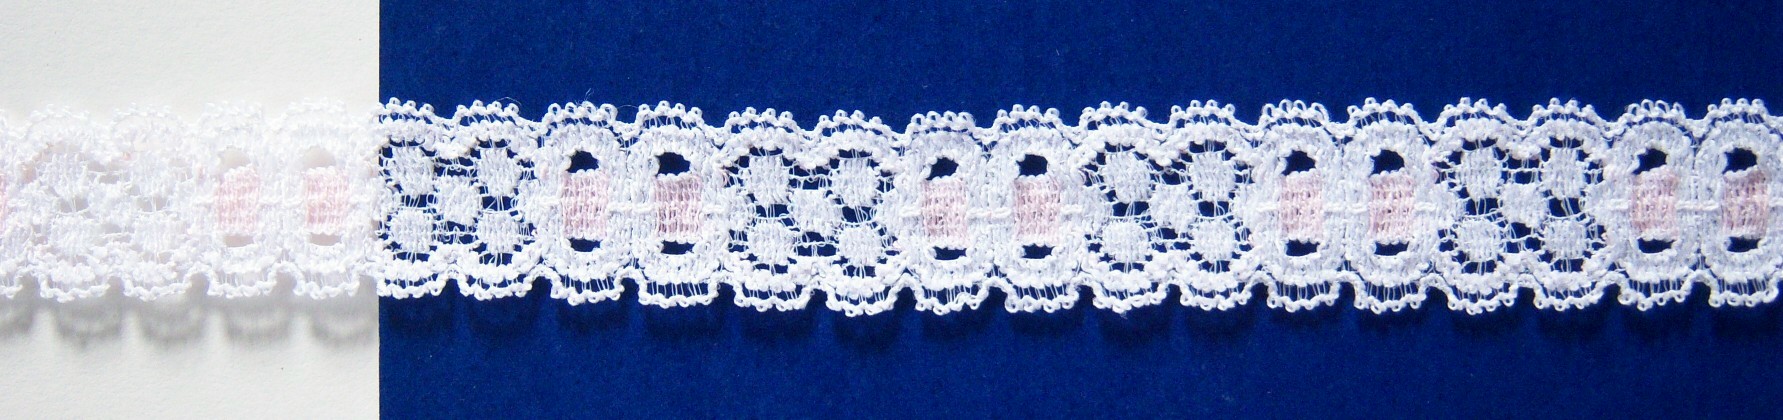 White/Pink 3/4" Stretch Lace